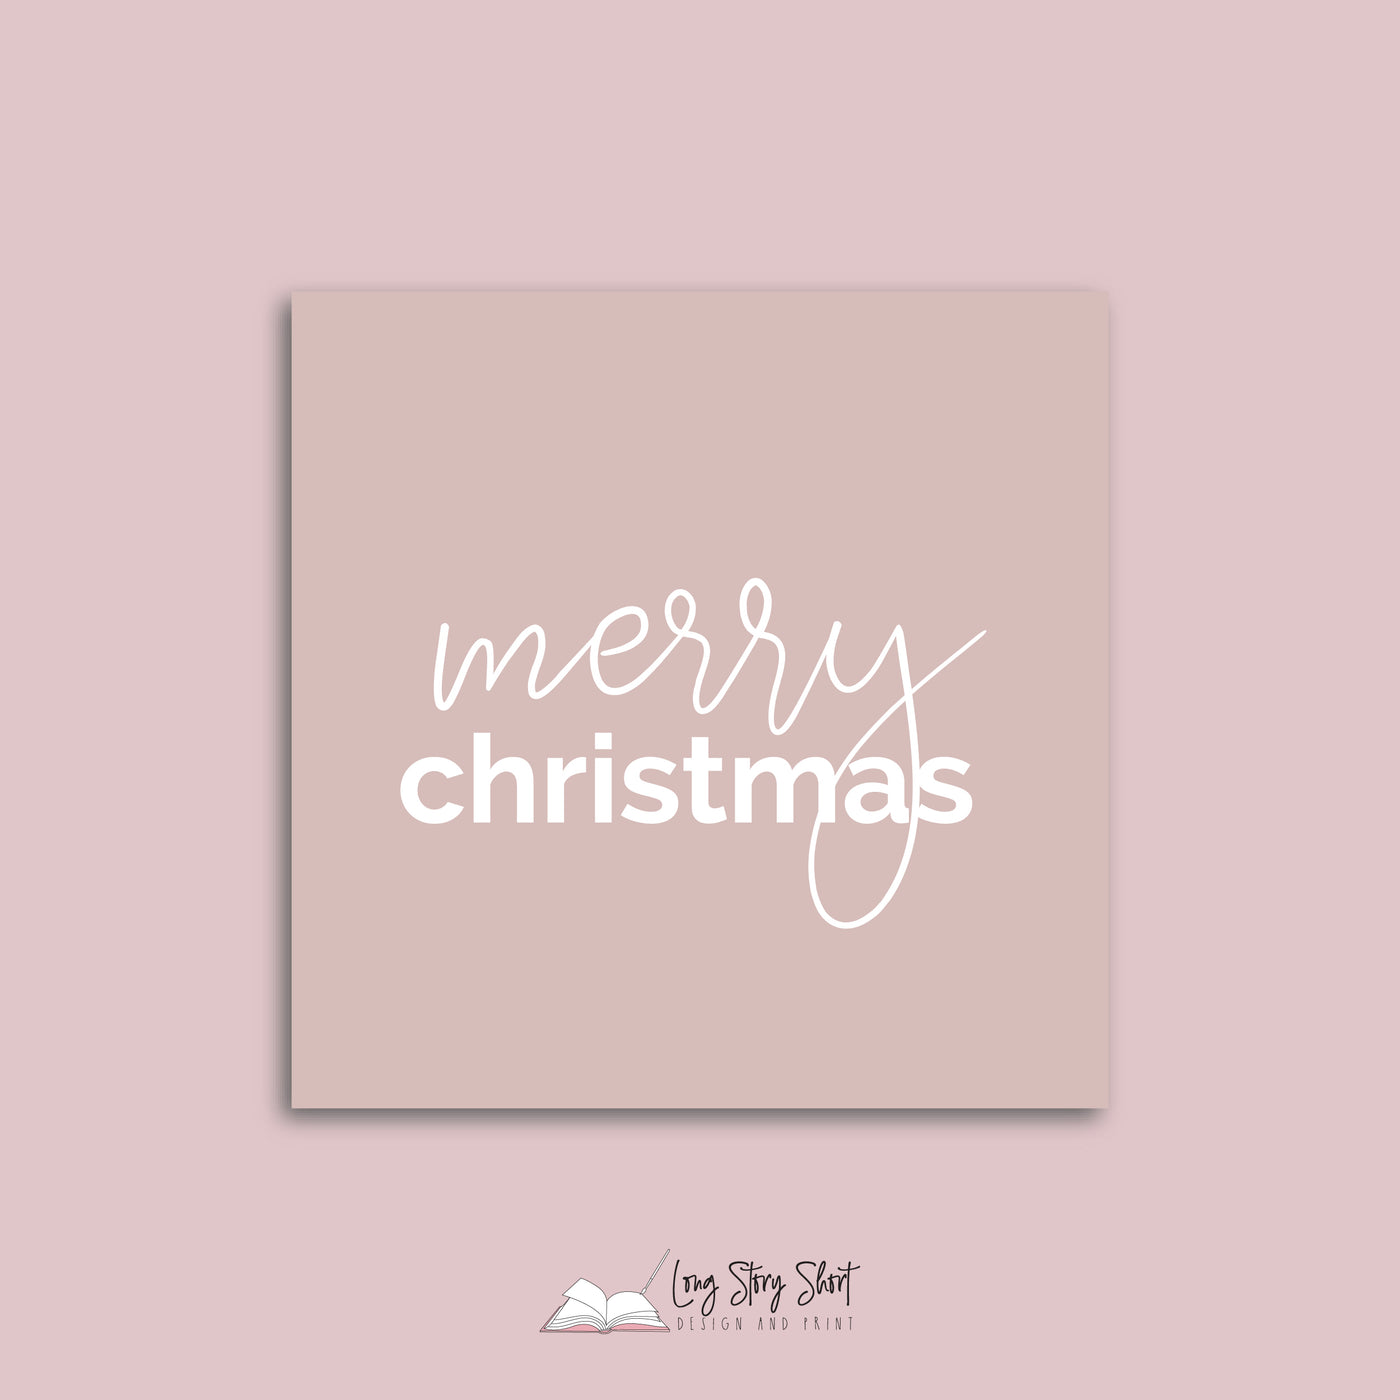 Warm Winter Wishes Christmas Vinyl Label Pack Square Matte/Gloss